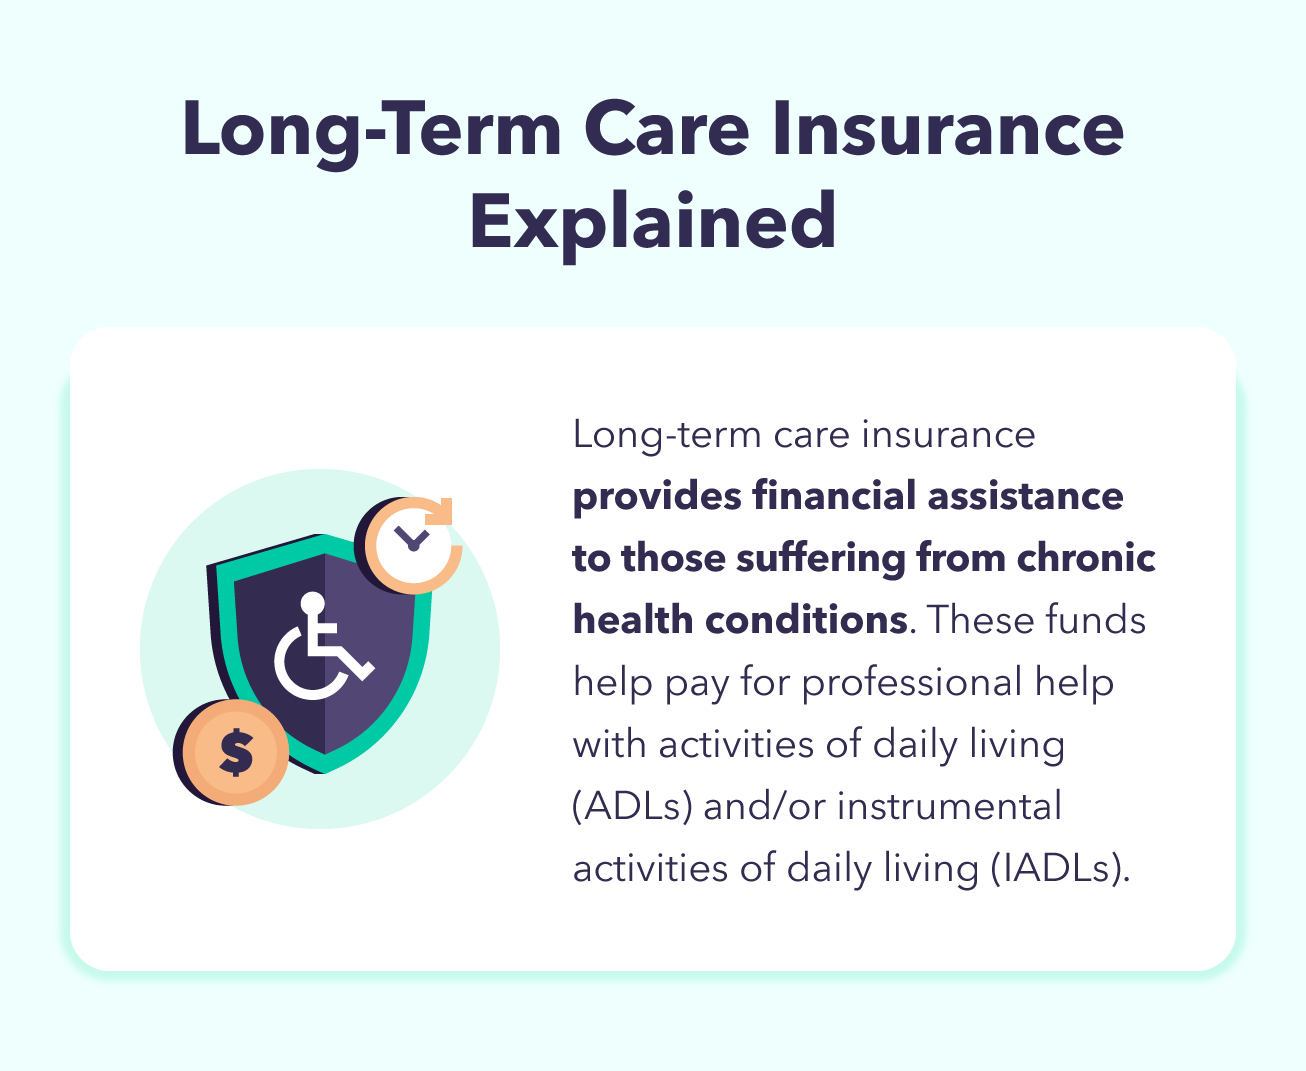 Where Can I Purchase Long-Term Care Insurance